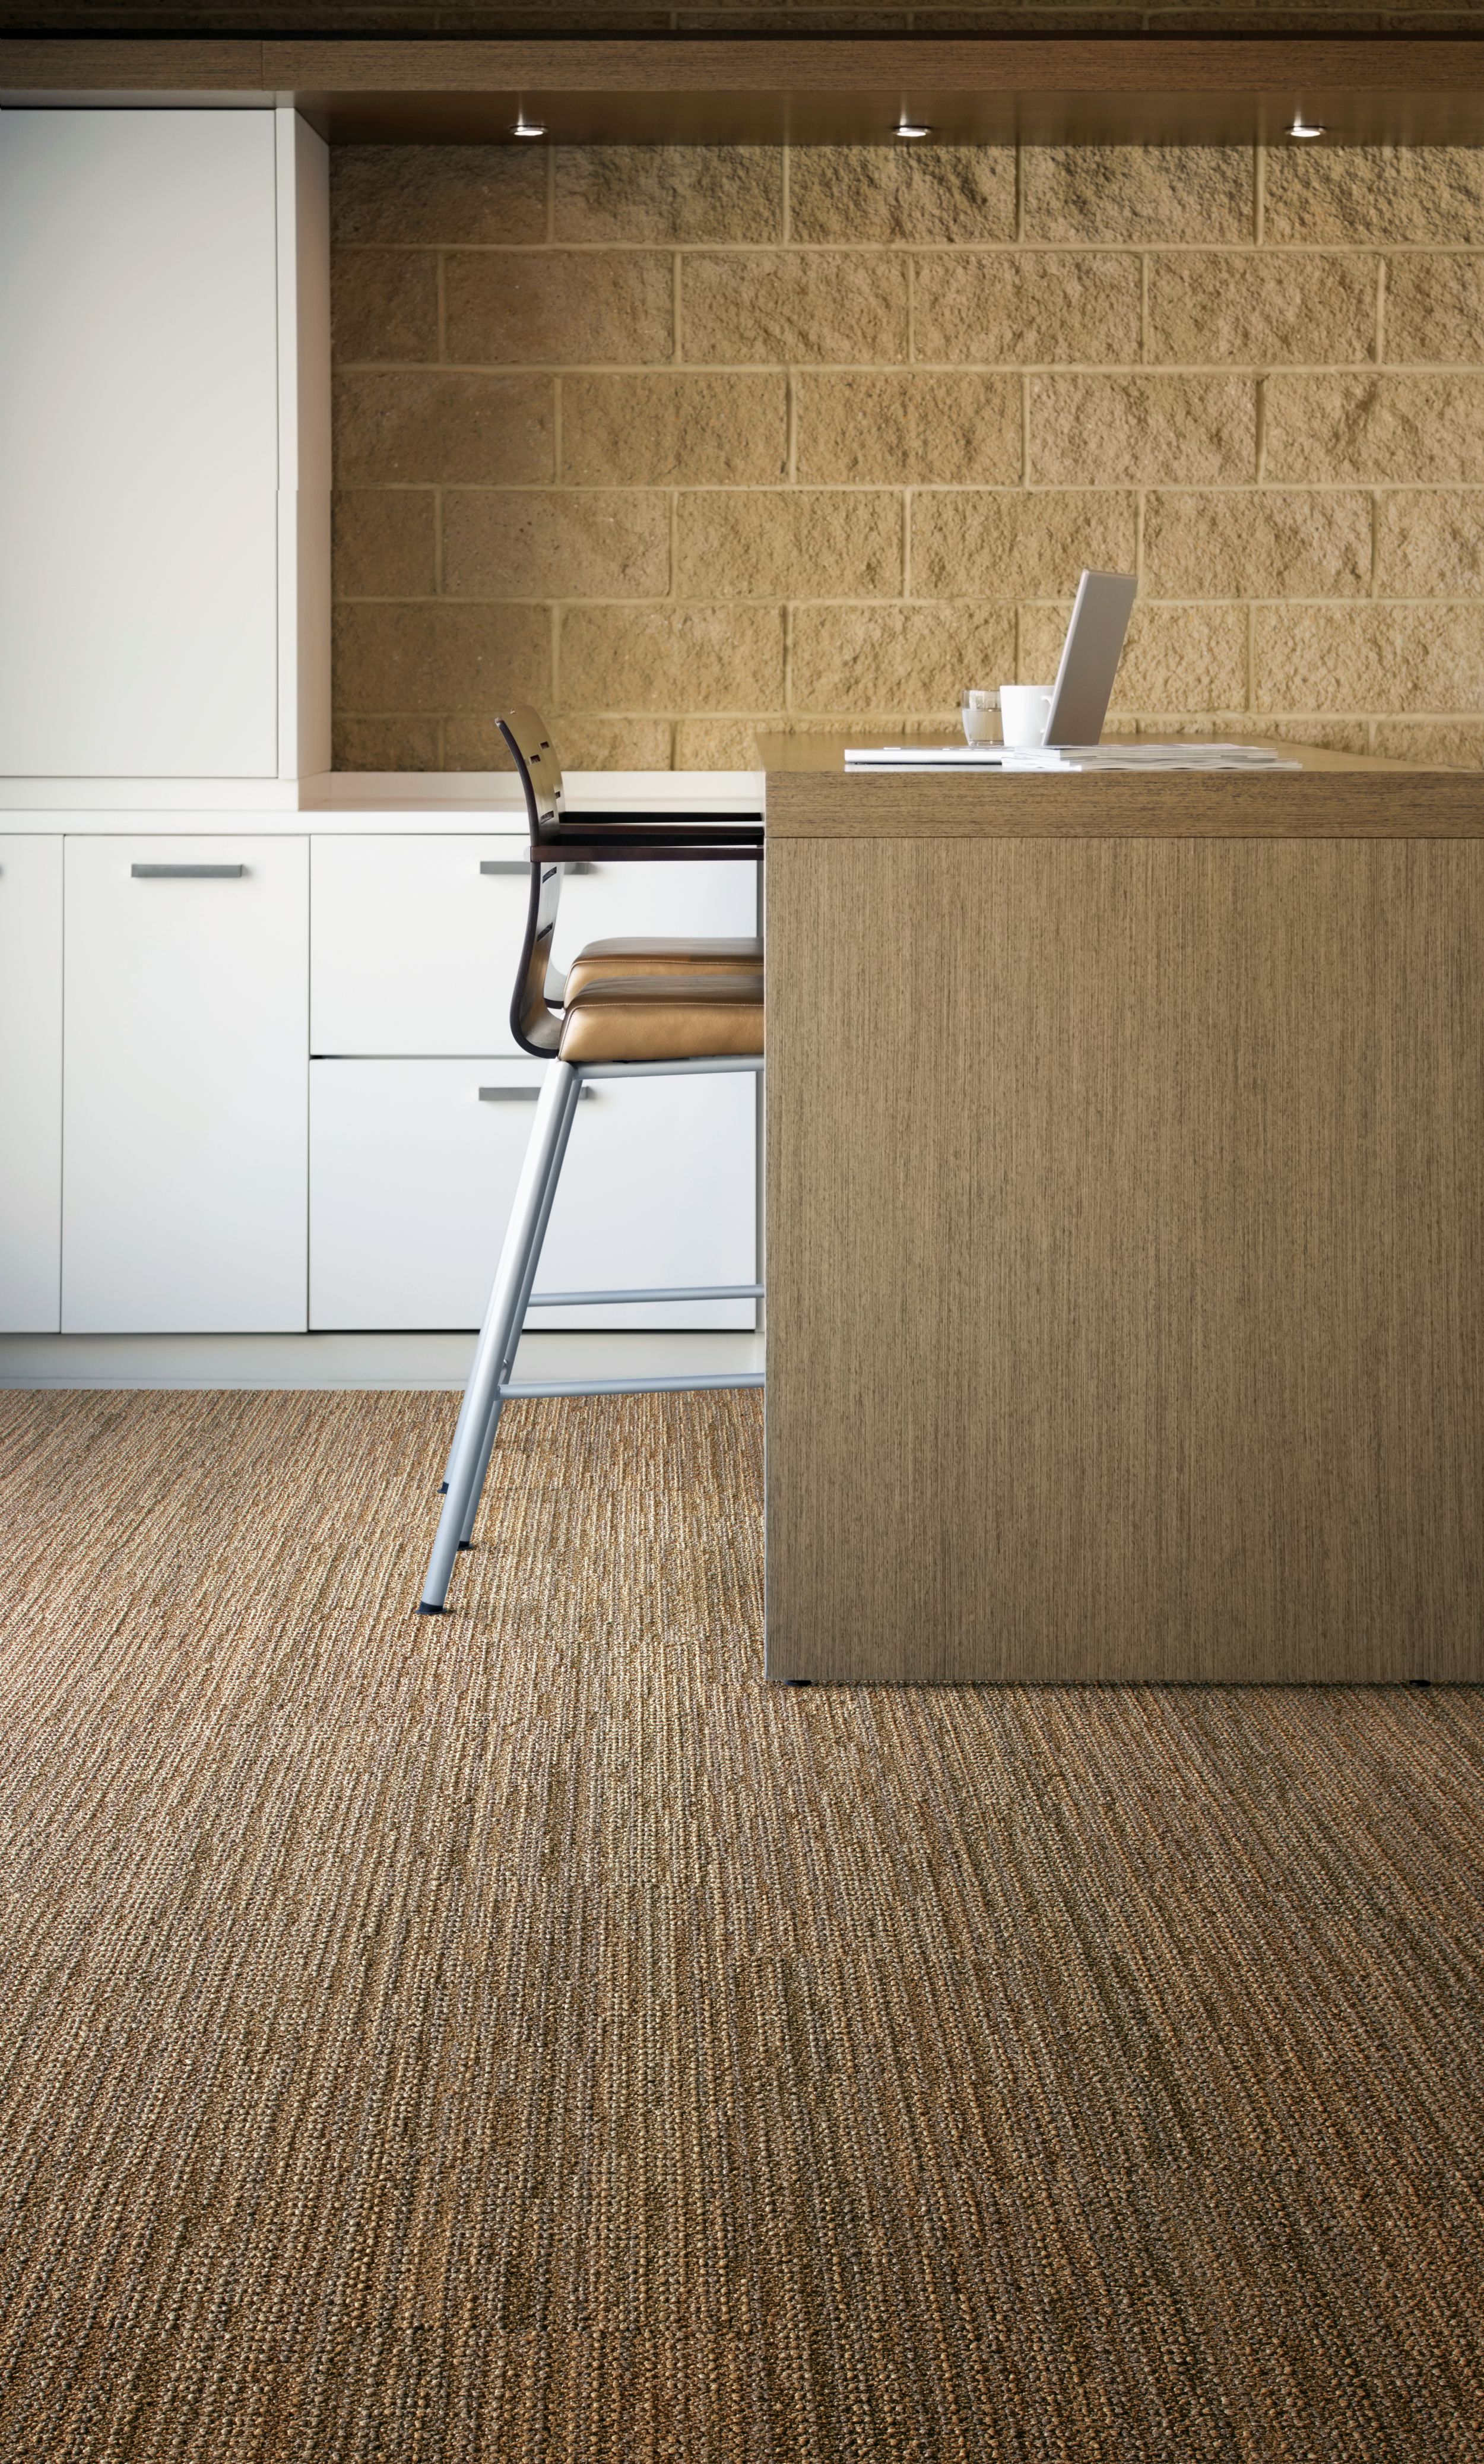 Interface Afternoon Light carpet tile in workspace with white file cabinets and desk numéro d’image 1